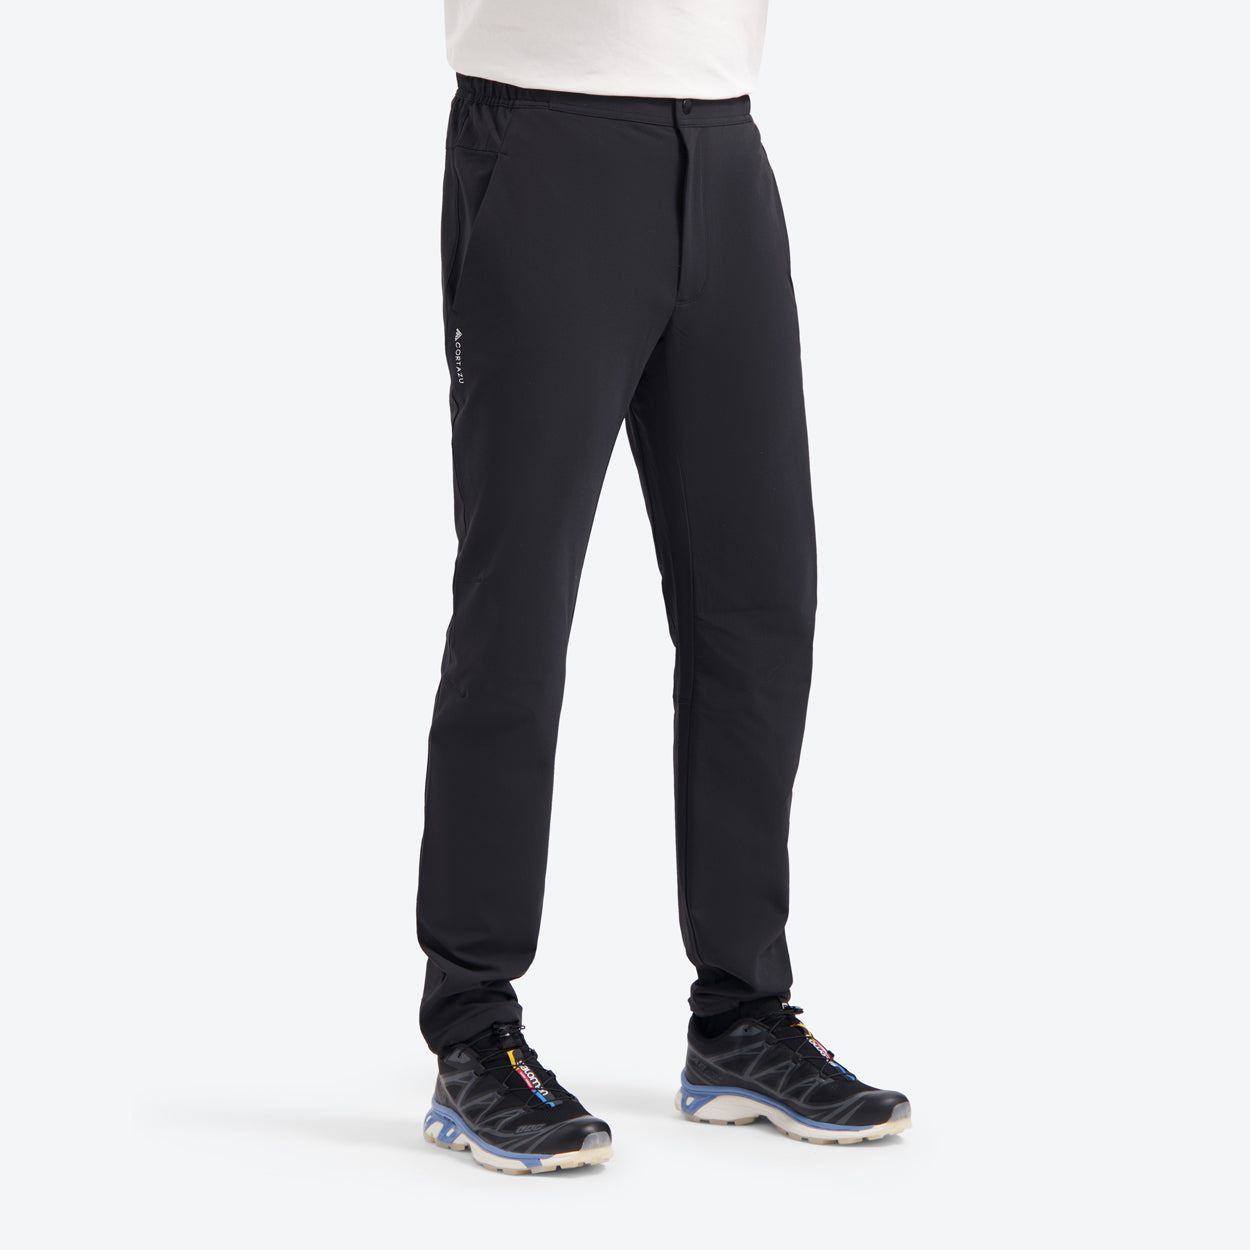 Stretch Pant in Black for Men - Outdoor Style by Cortazu